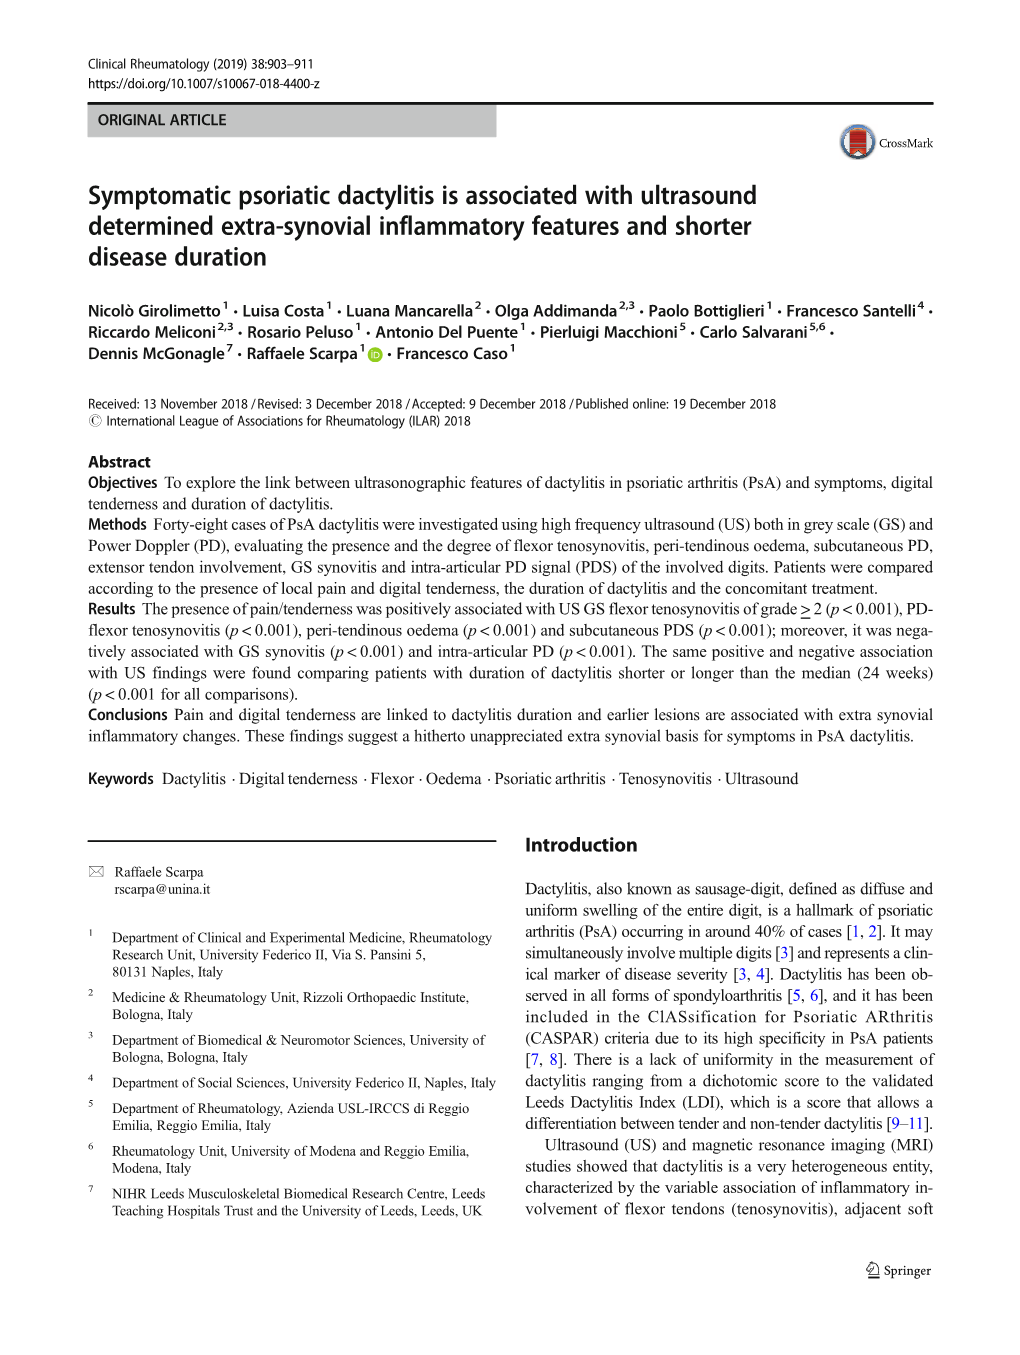 Symptomatic Psoriatic Dactylitis Is Associated with Ultrasound Determined Extra-Synovial Inflammatory Features and Shorter Disease Duration